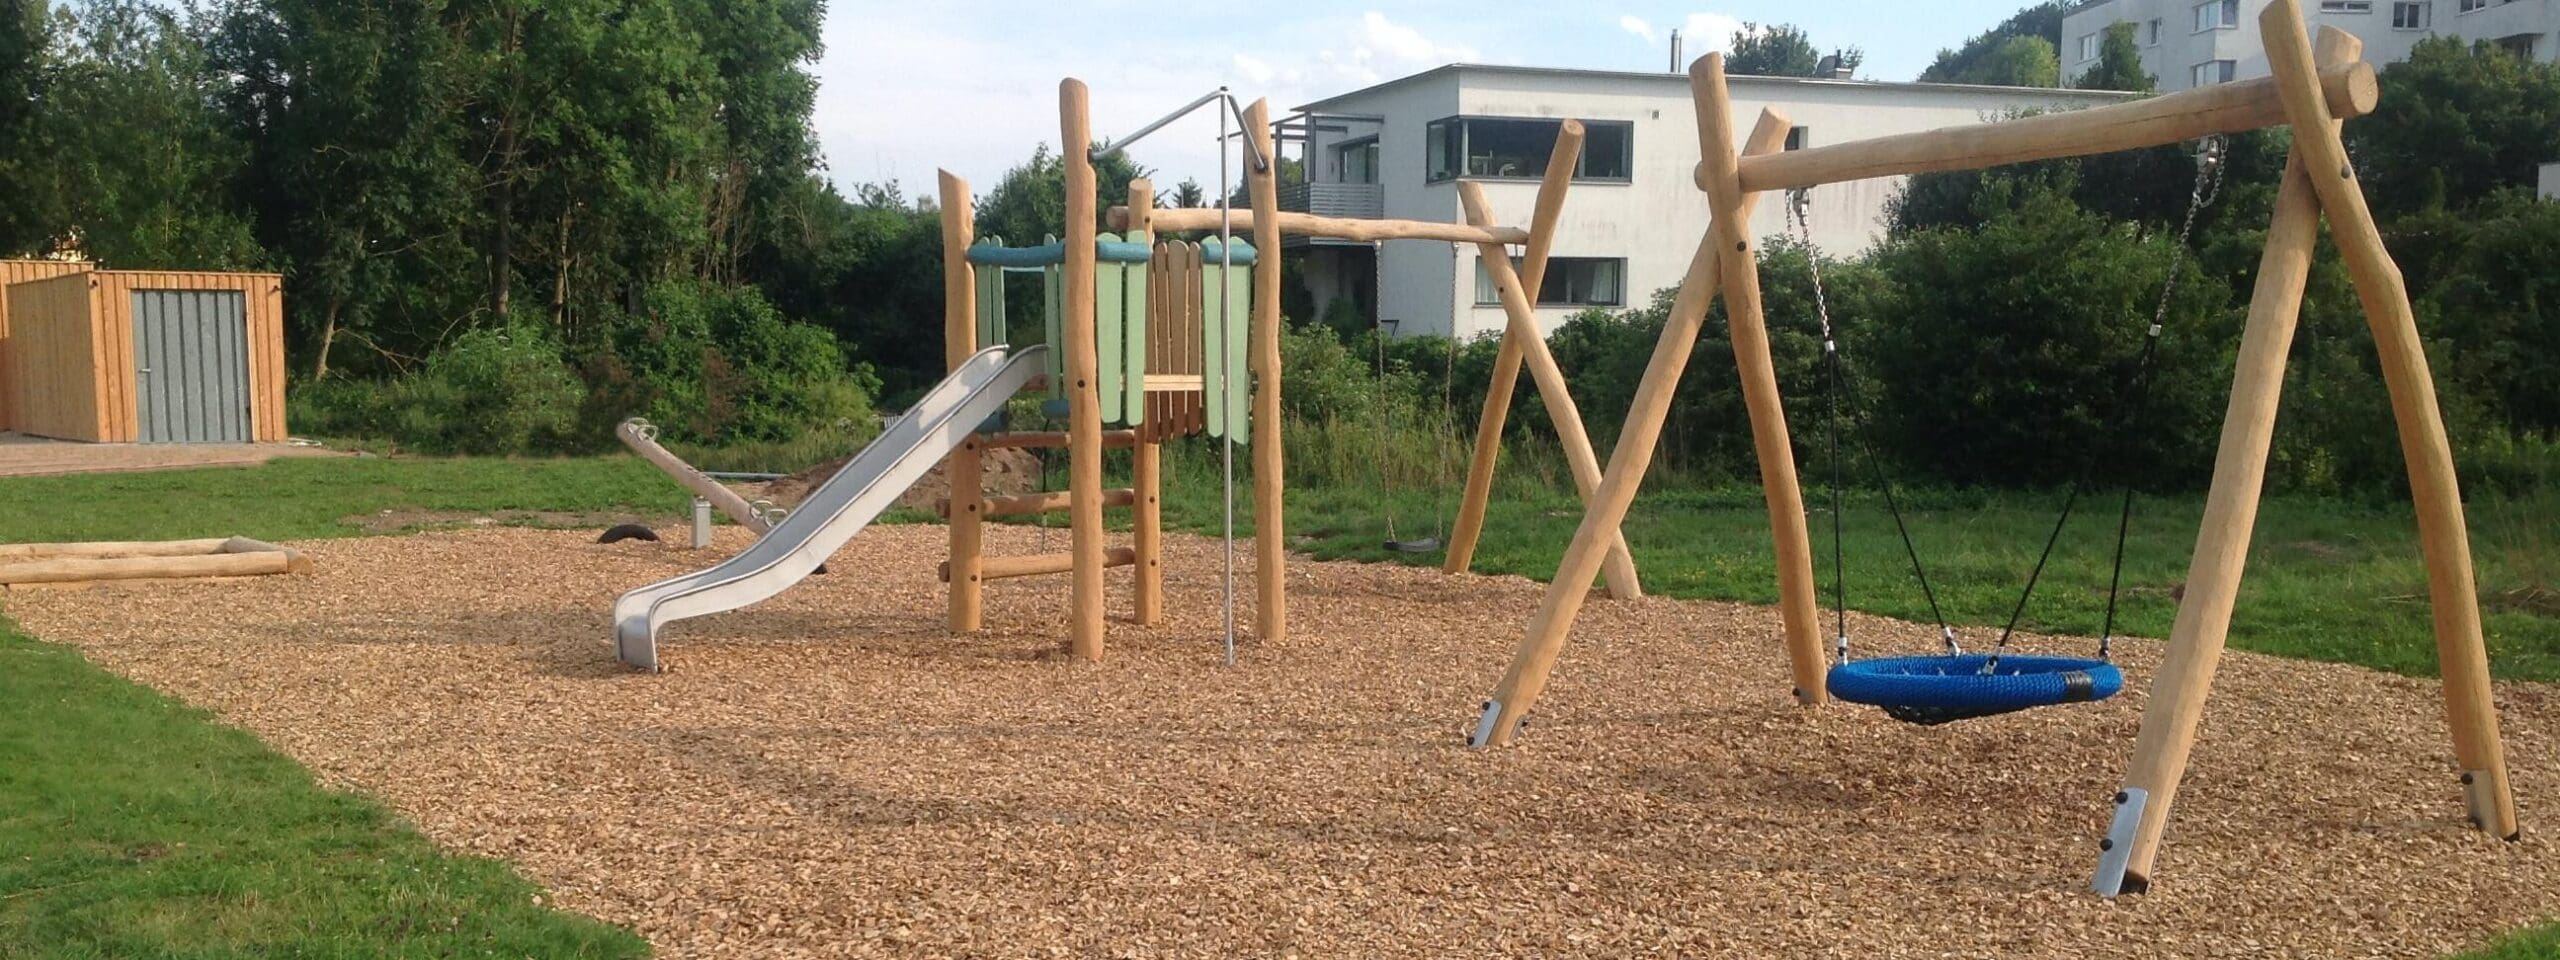 The Differences Between Wooden And Metal Playground Equipment?